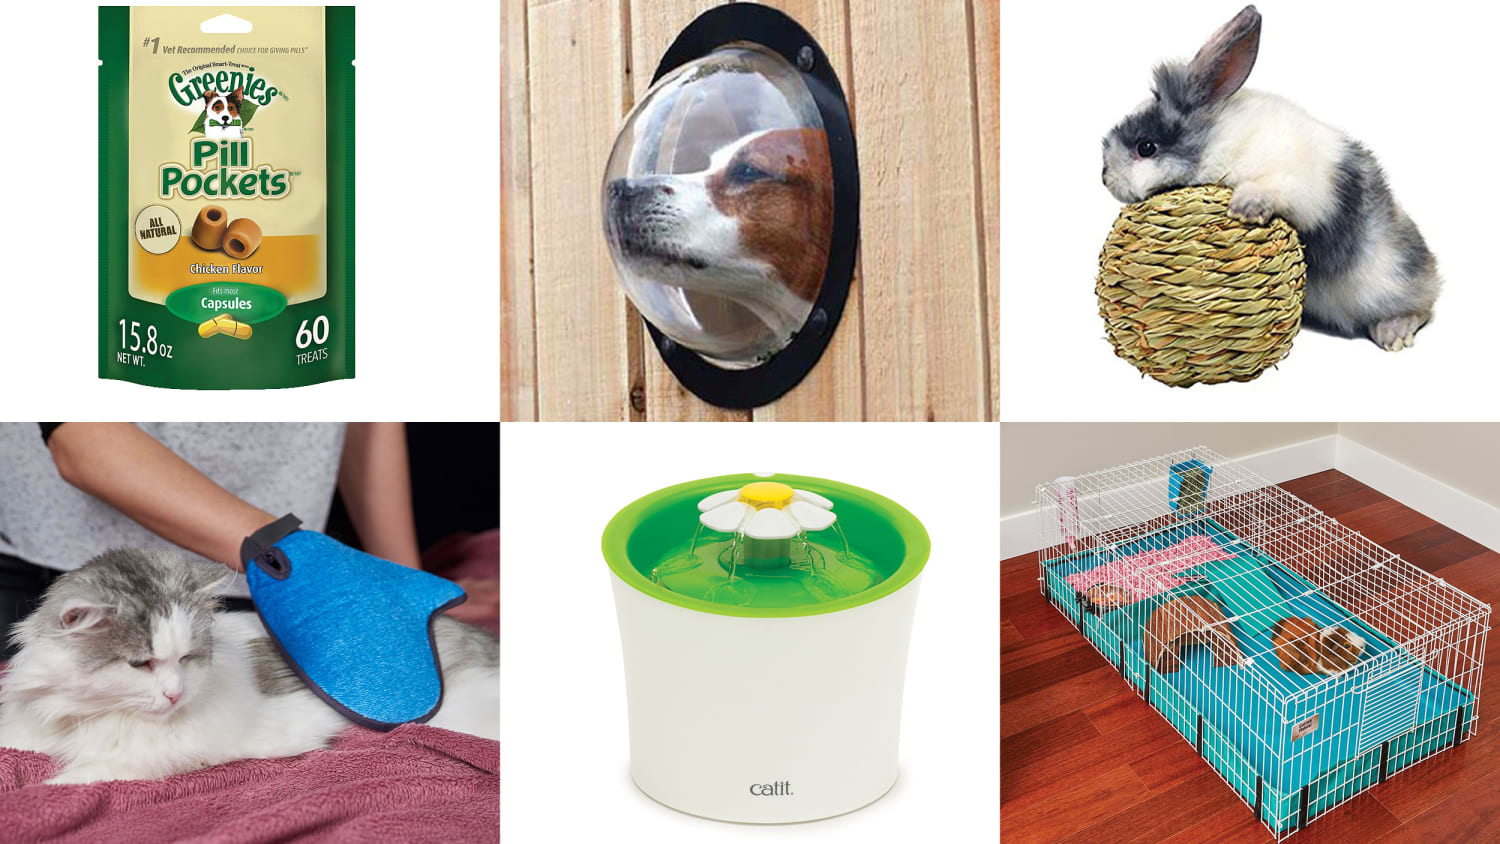 The 13 best products, gadgets and tools for pets on Amazon